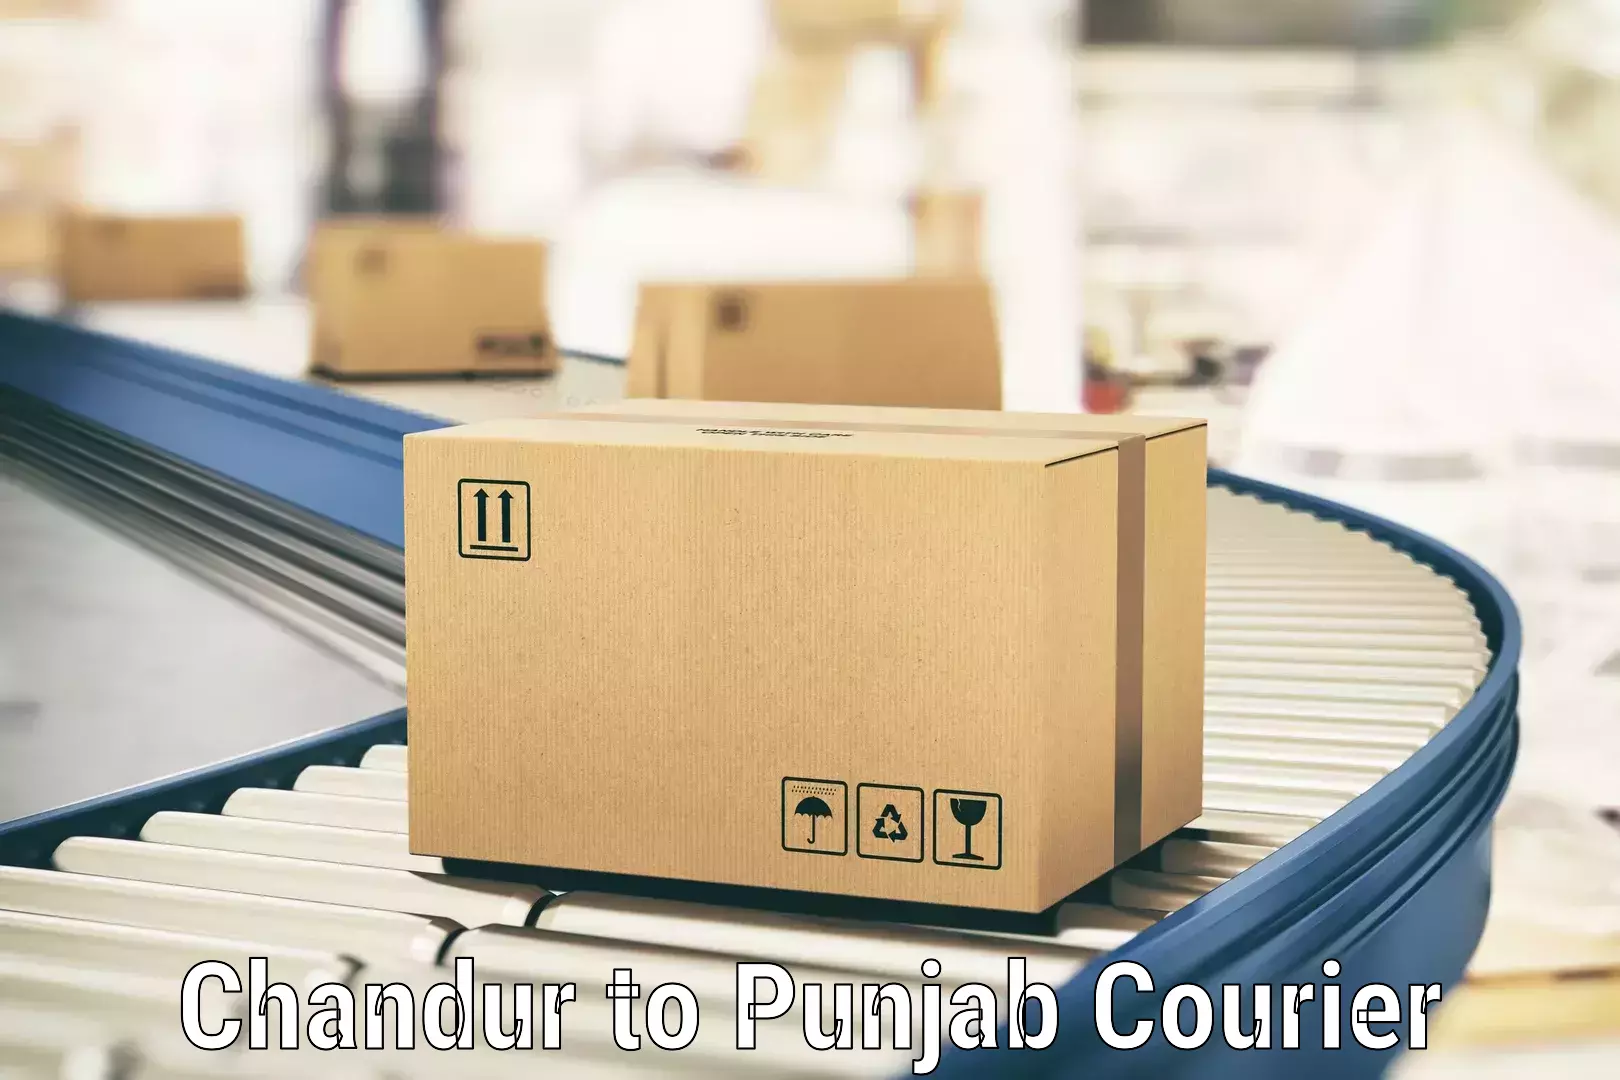 Quick courier services in Chandur to Hoshiarpur